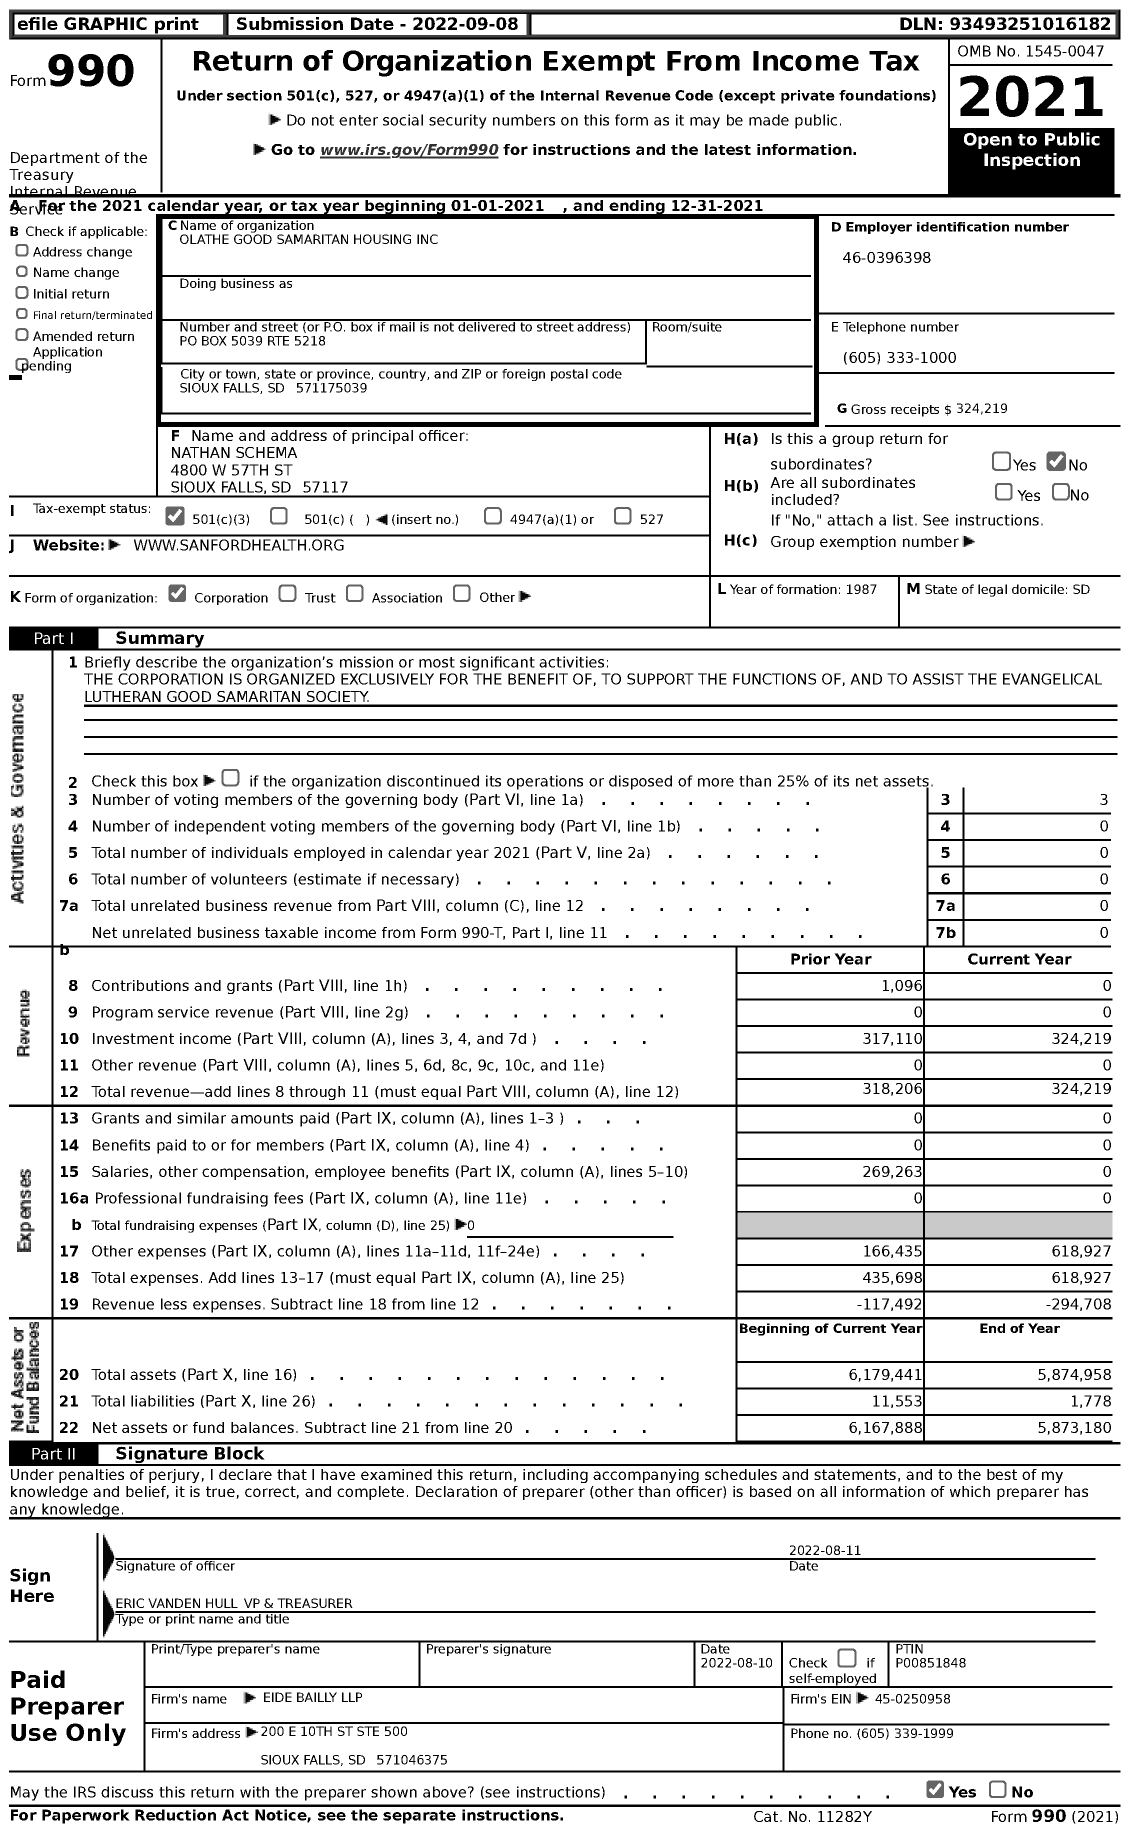 Image of first page of 2021 Form 990 for Olathe Good Samaritan Housing